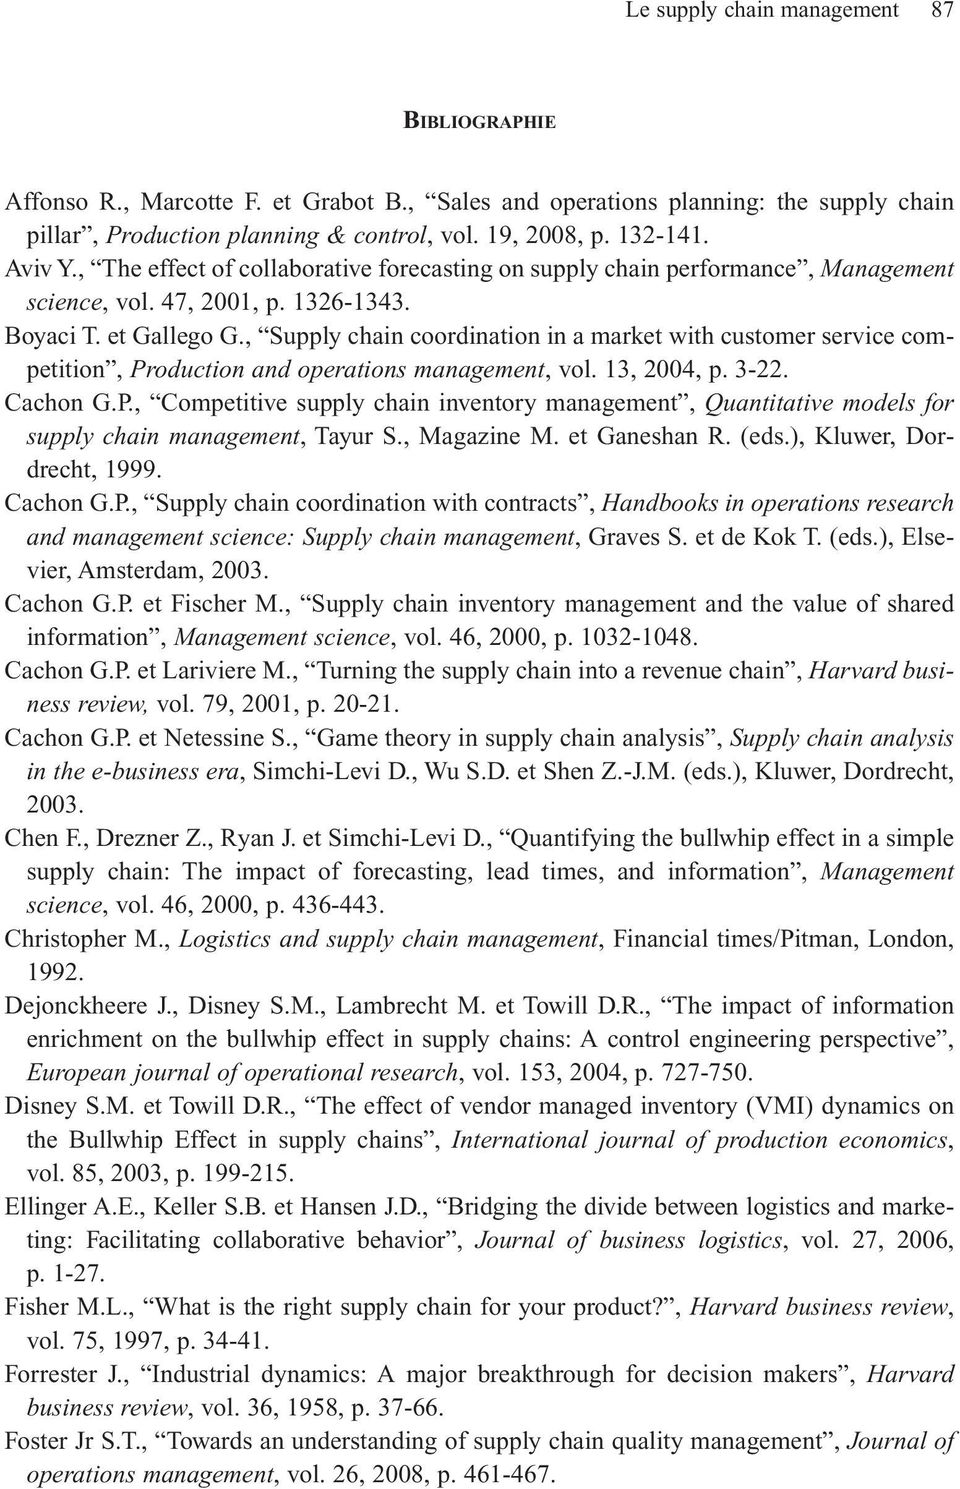 , Supply chain coordination in a market with customer service competition, Production and operations management, vol. 13, 2004, p. 3-22. Cachon G.P., Competitive supply chain inventory management, Quantitative models for supply chain management, Tayur S.